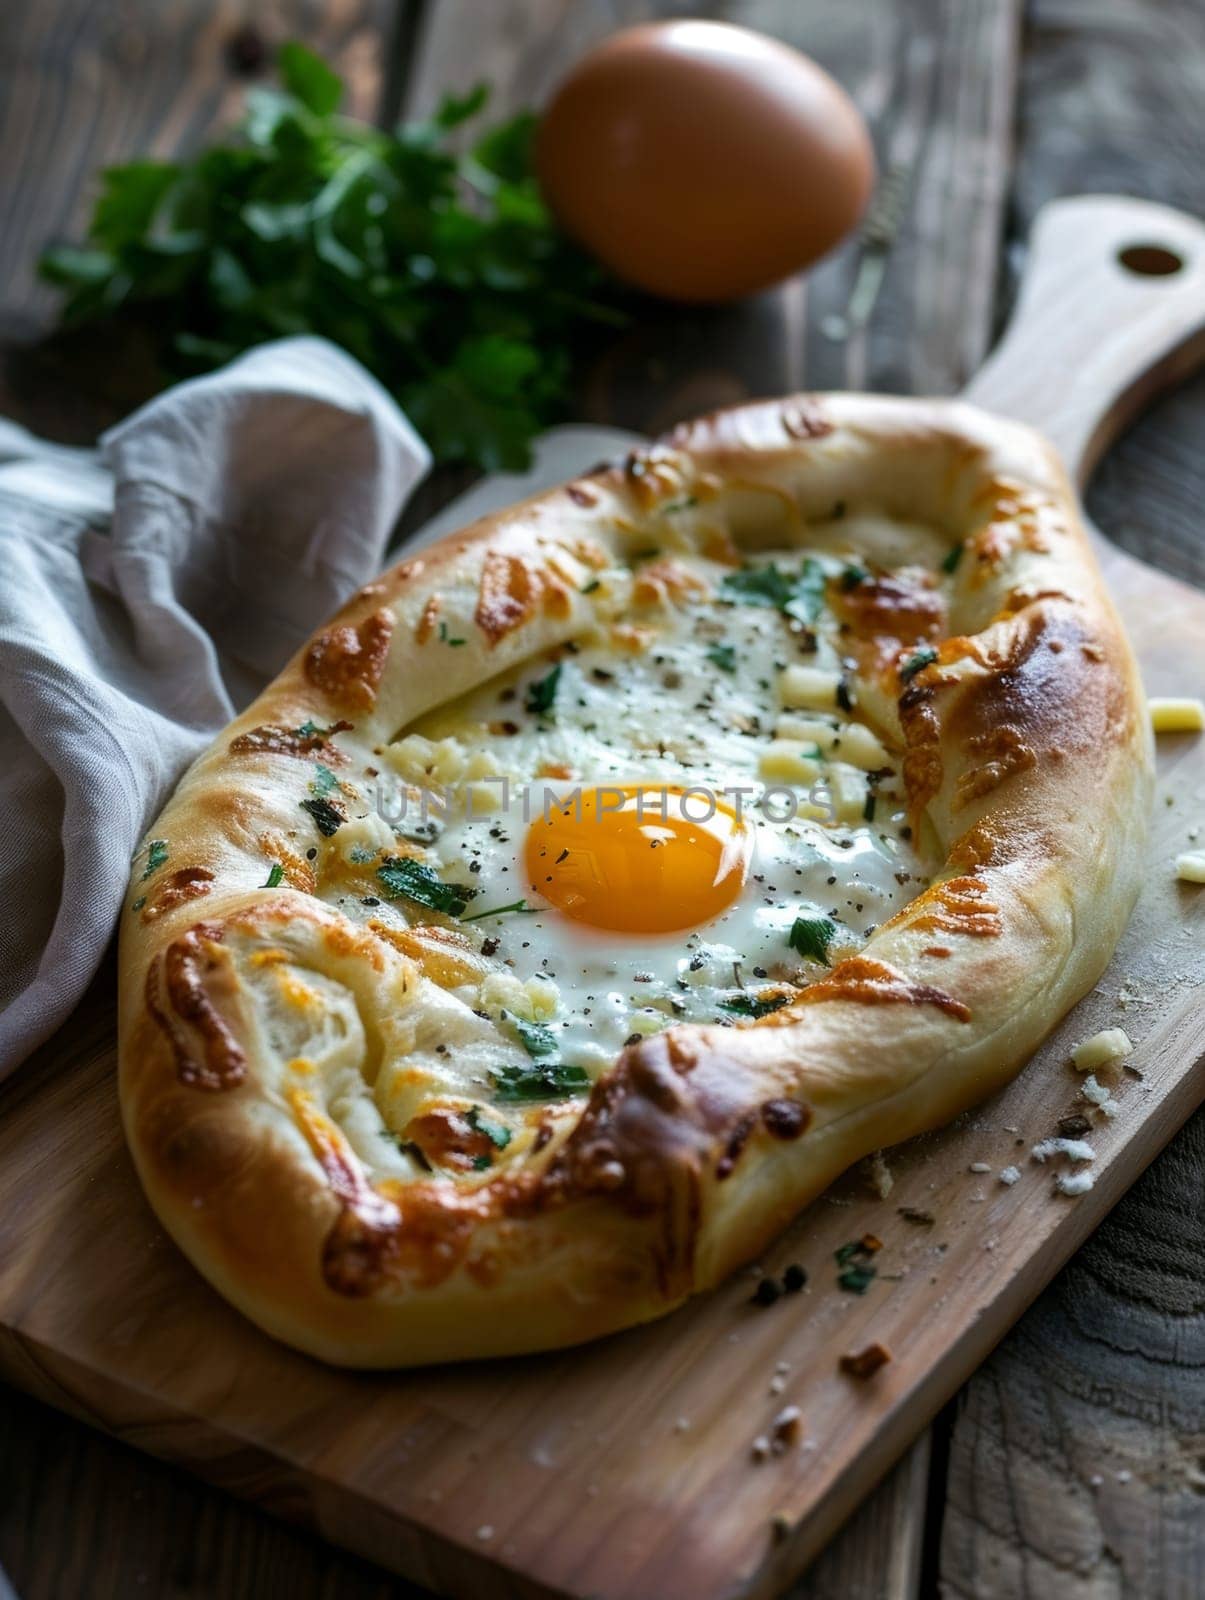 Traditional Georgian khachapuri, a cheesy bread with an egg baked in the center, served on a wooden paddle. This indulgent and comforting dish reflects unique culinary heritage of the Caucasus region